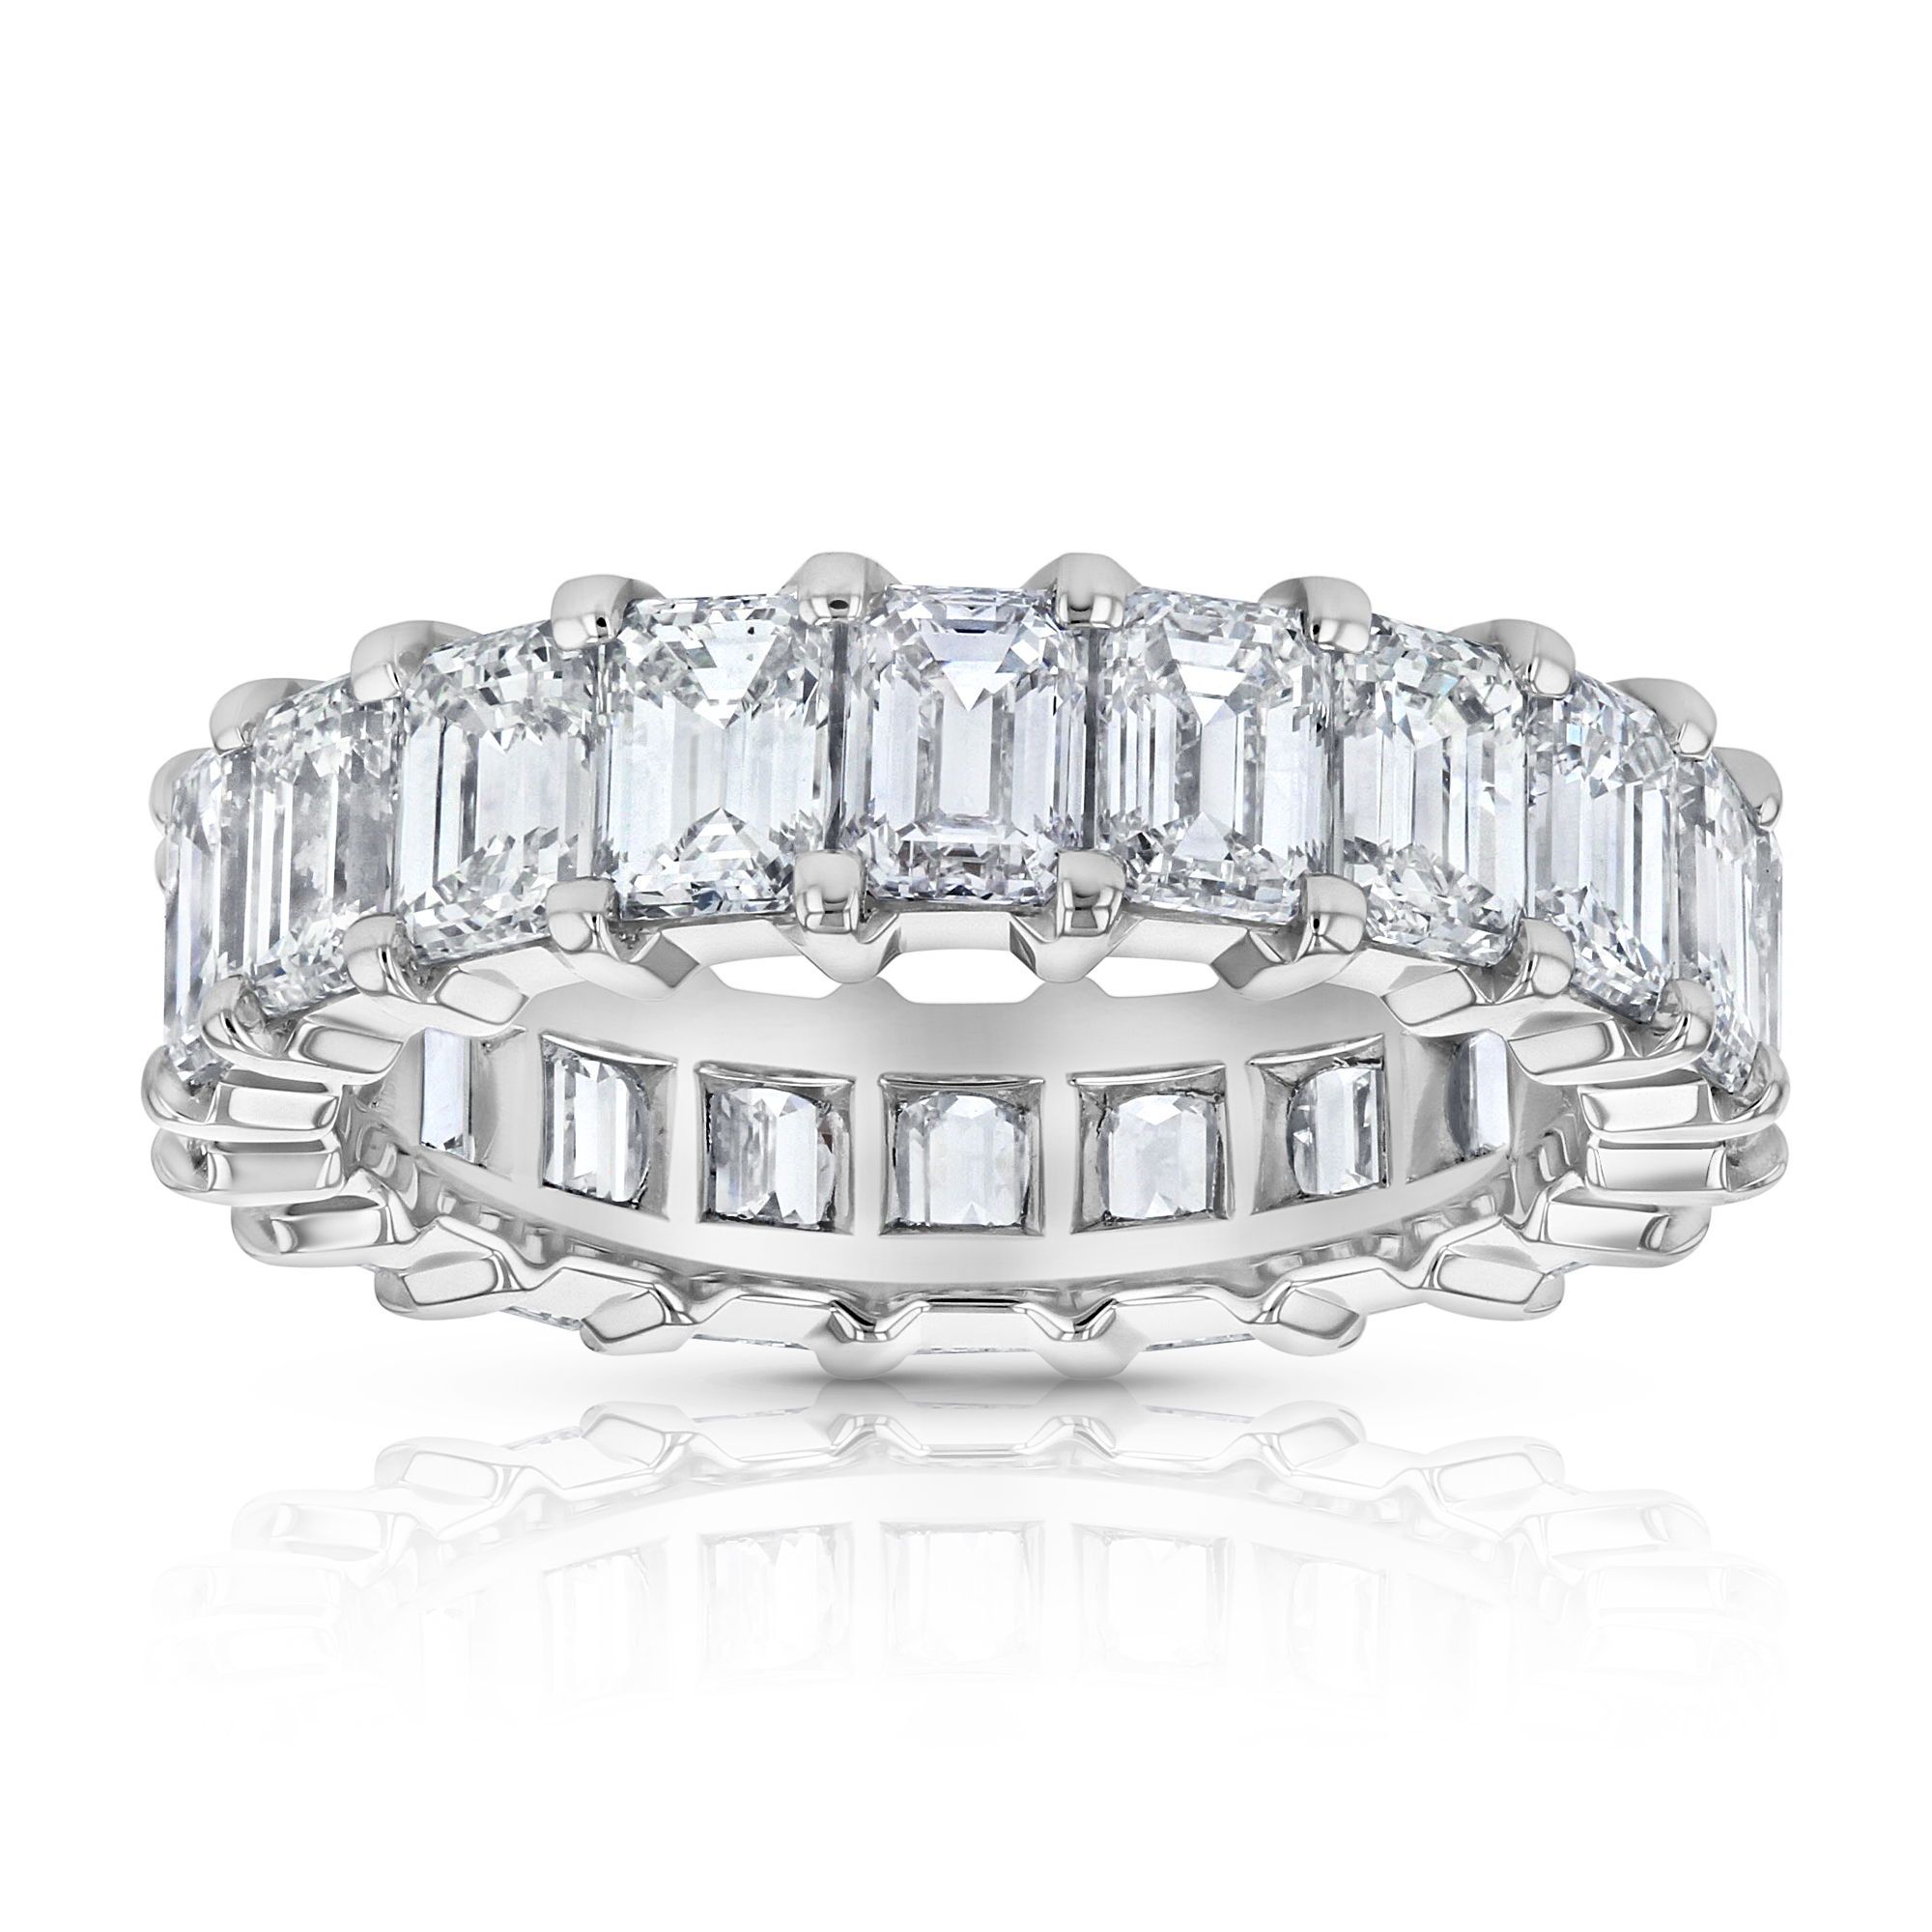 View 6.13ctw Emerald Cut Eternity Band in 18k White Gold